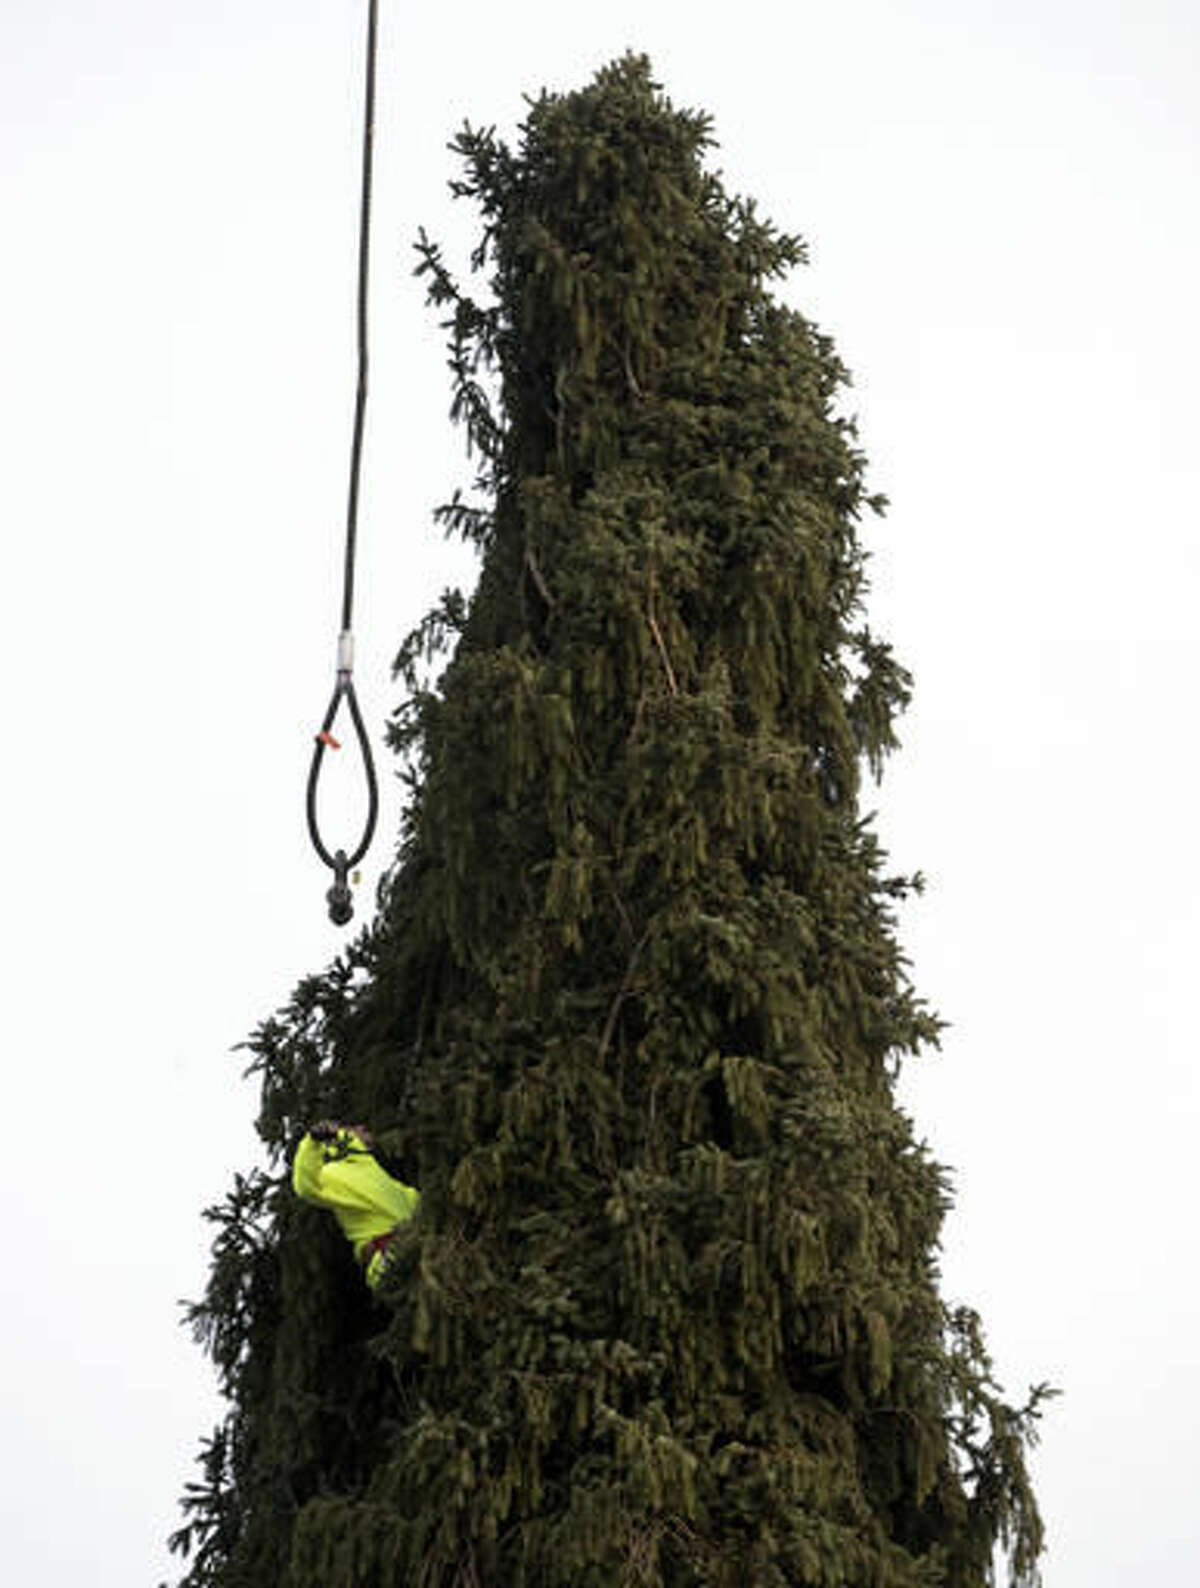 A worker prepares a 94-foot Norway spruce that will serve as the Christmas tree at Rockefeller Center before it is cut on Thursday, Nov. 10, 2016, in Oneonta, N.Y. The spruce is due to arrive Saturday in Manhattan, about 140 miles away. (AP Photo/Mike Groll)